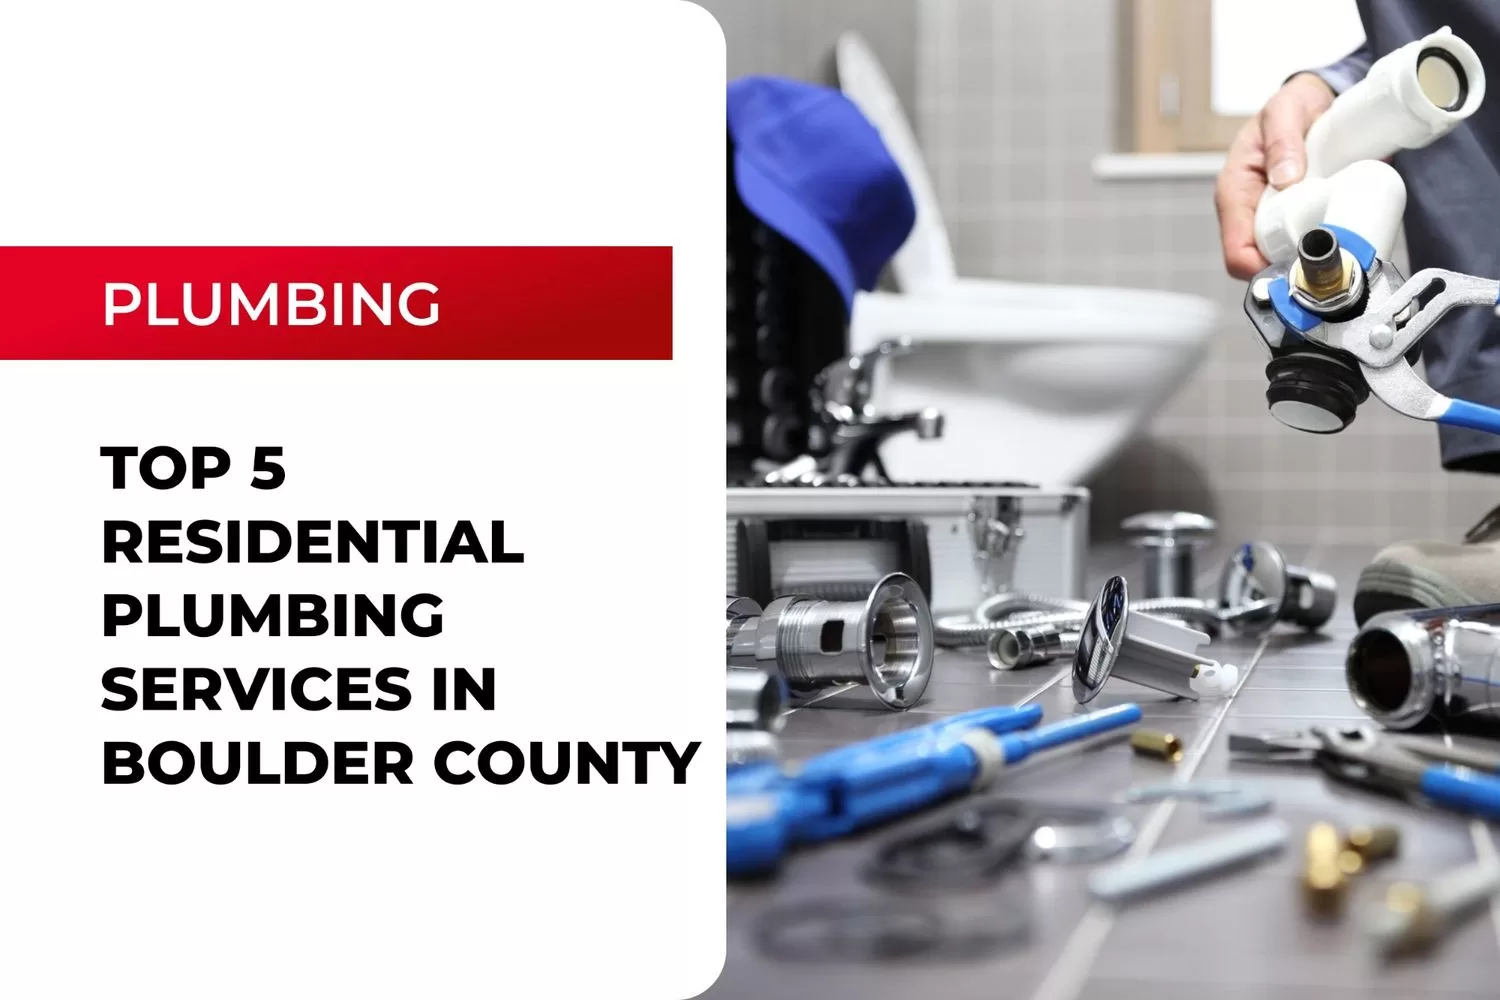 Top 5 Residential Plumbing Services in Boulder County